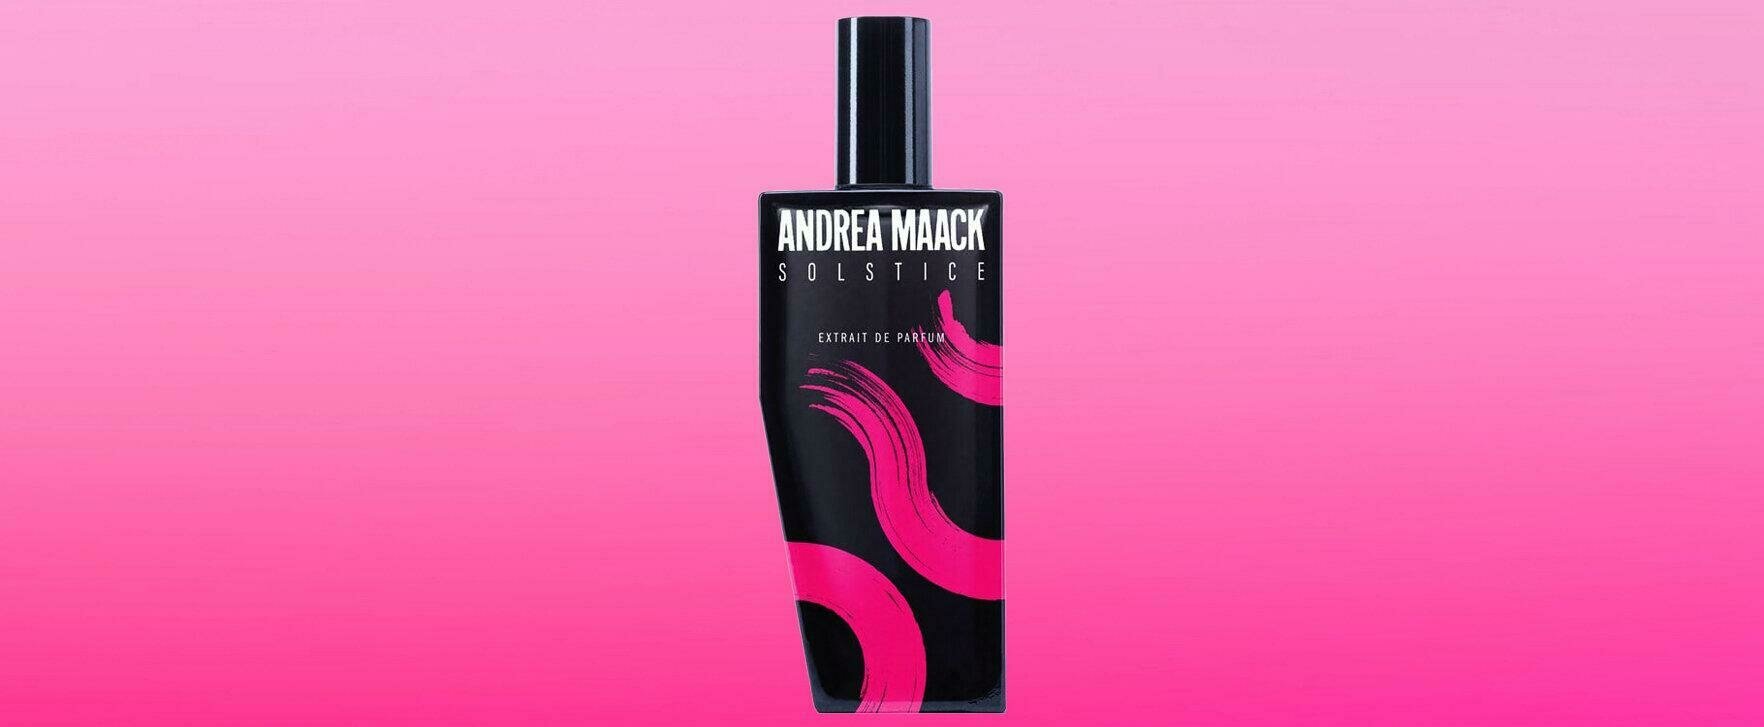 "Solstice": The New Limited Sweet-Aquatic Fragrance Novelty by Andrea Maack